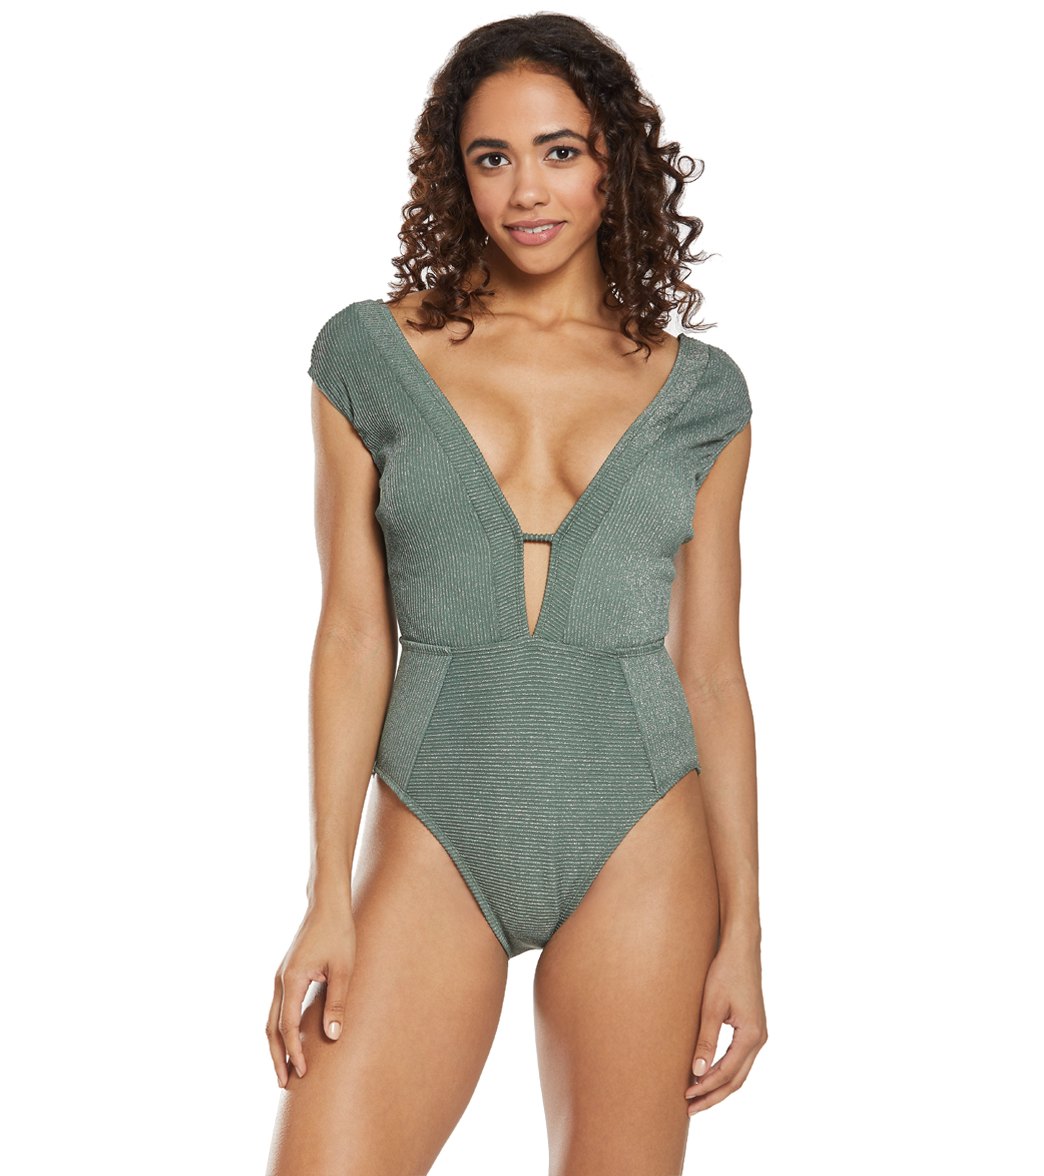 Kenneth Cole Luxury Rib Plunge One Piece Swimsuit - Olive Xl - Swimoutlet.com